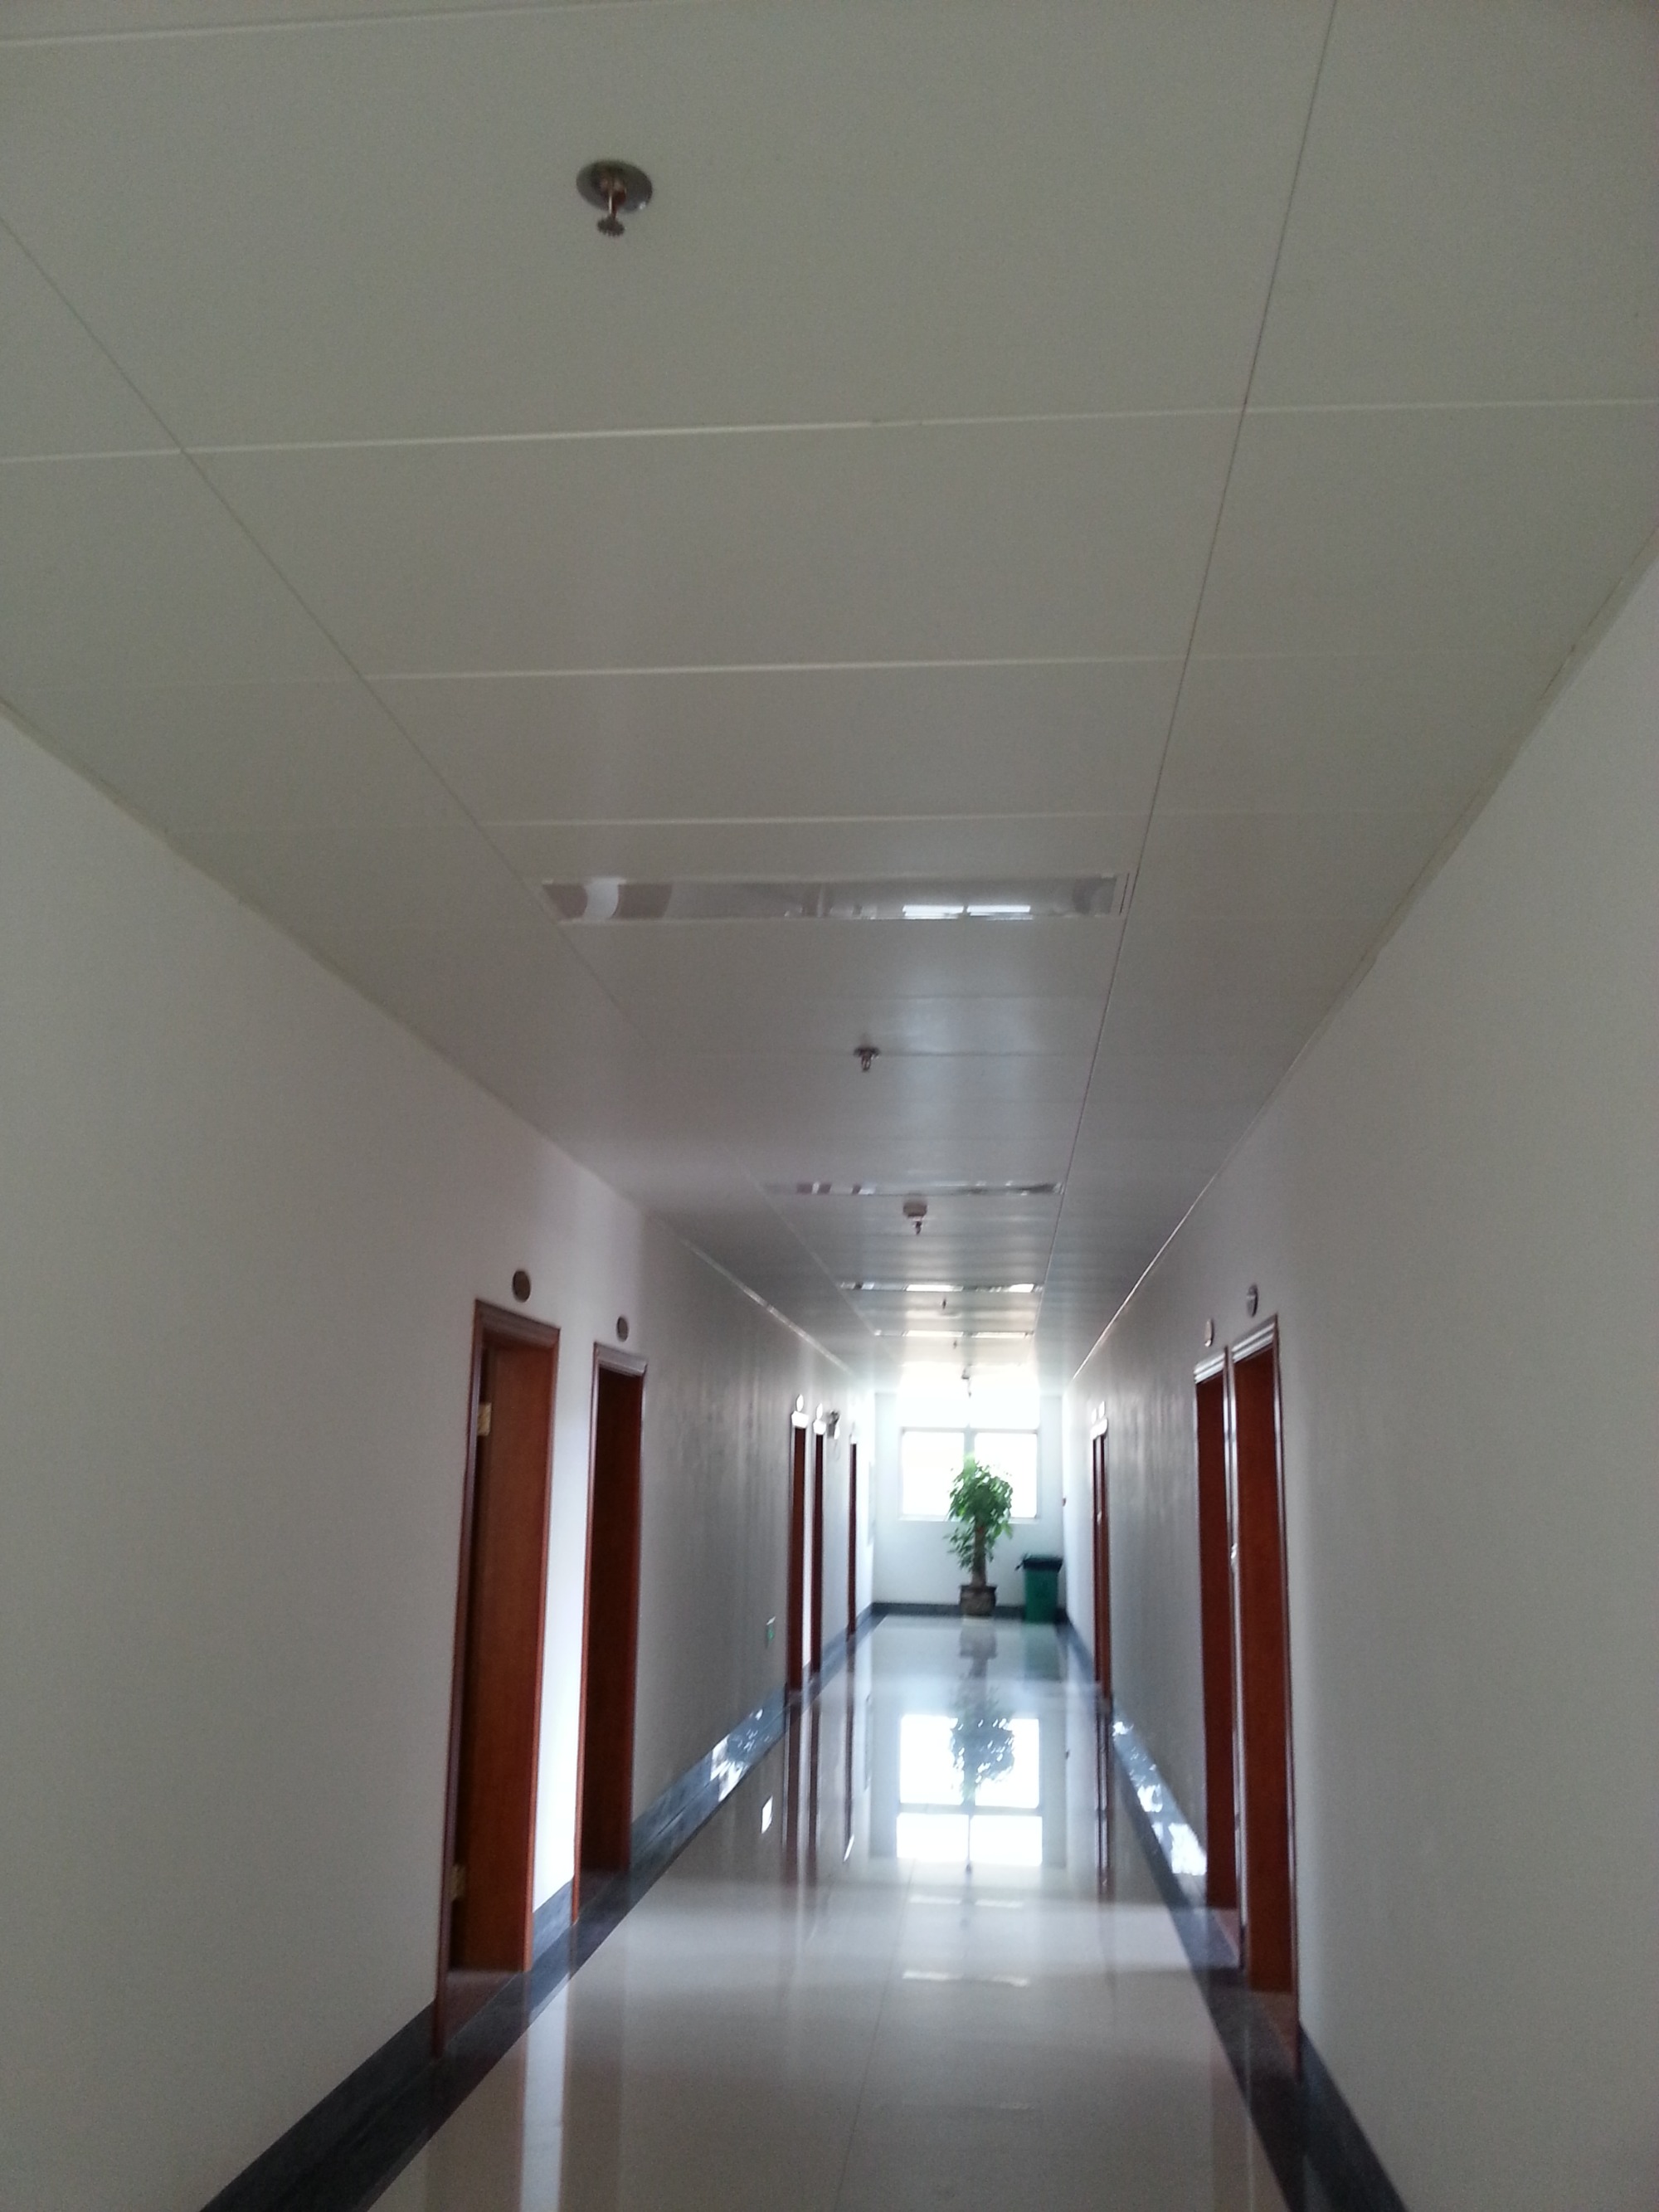 Saiyi Ceilings' Wood Solutions are enhanced, naturally